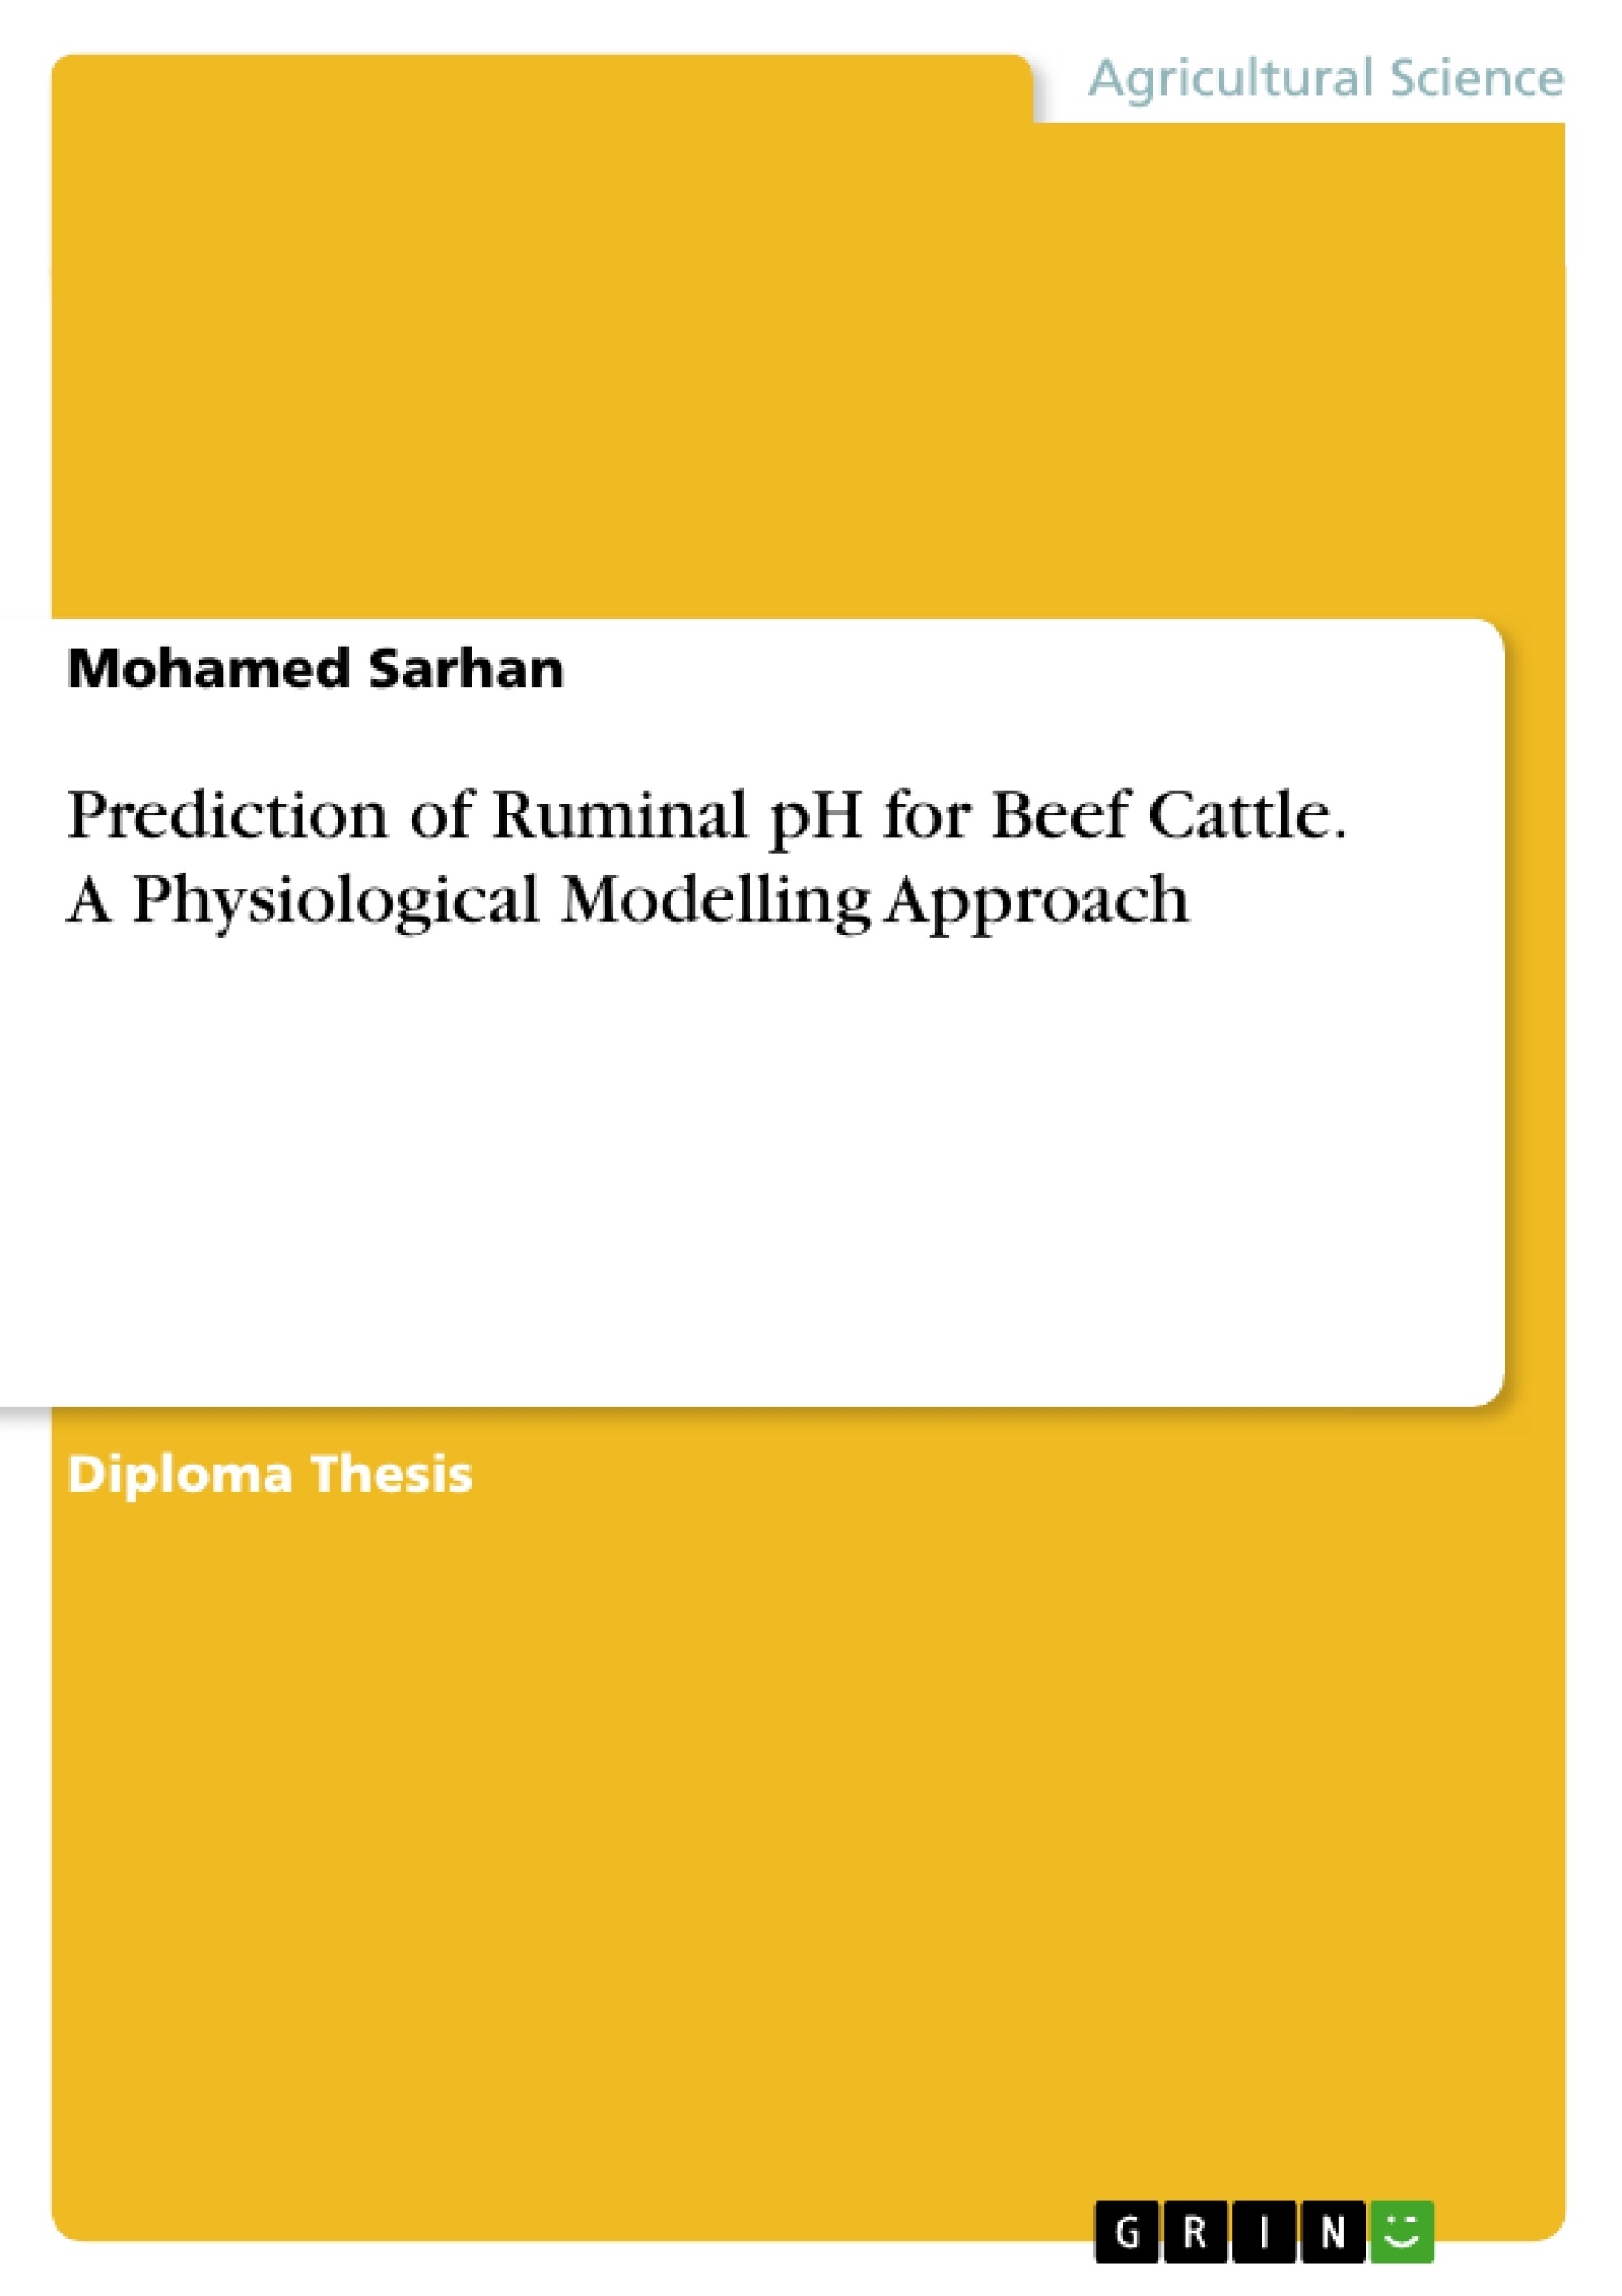 Título: Prediction of Ruminal pH for Beef Cattle. A Physiological Modelling Approach